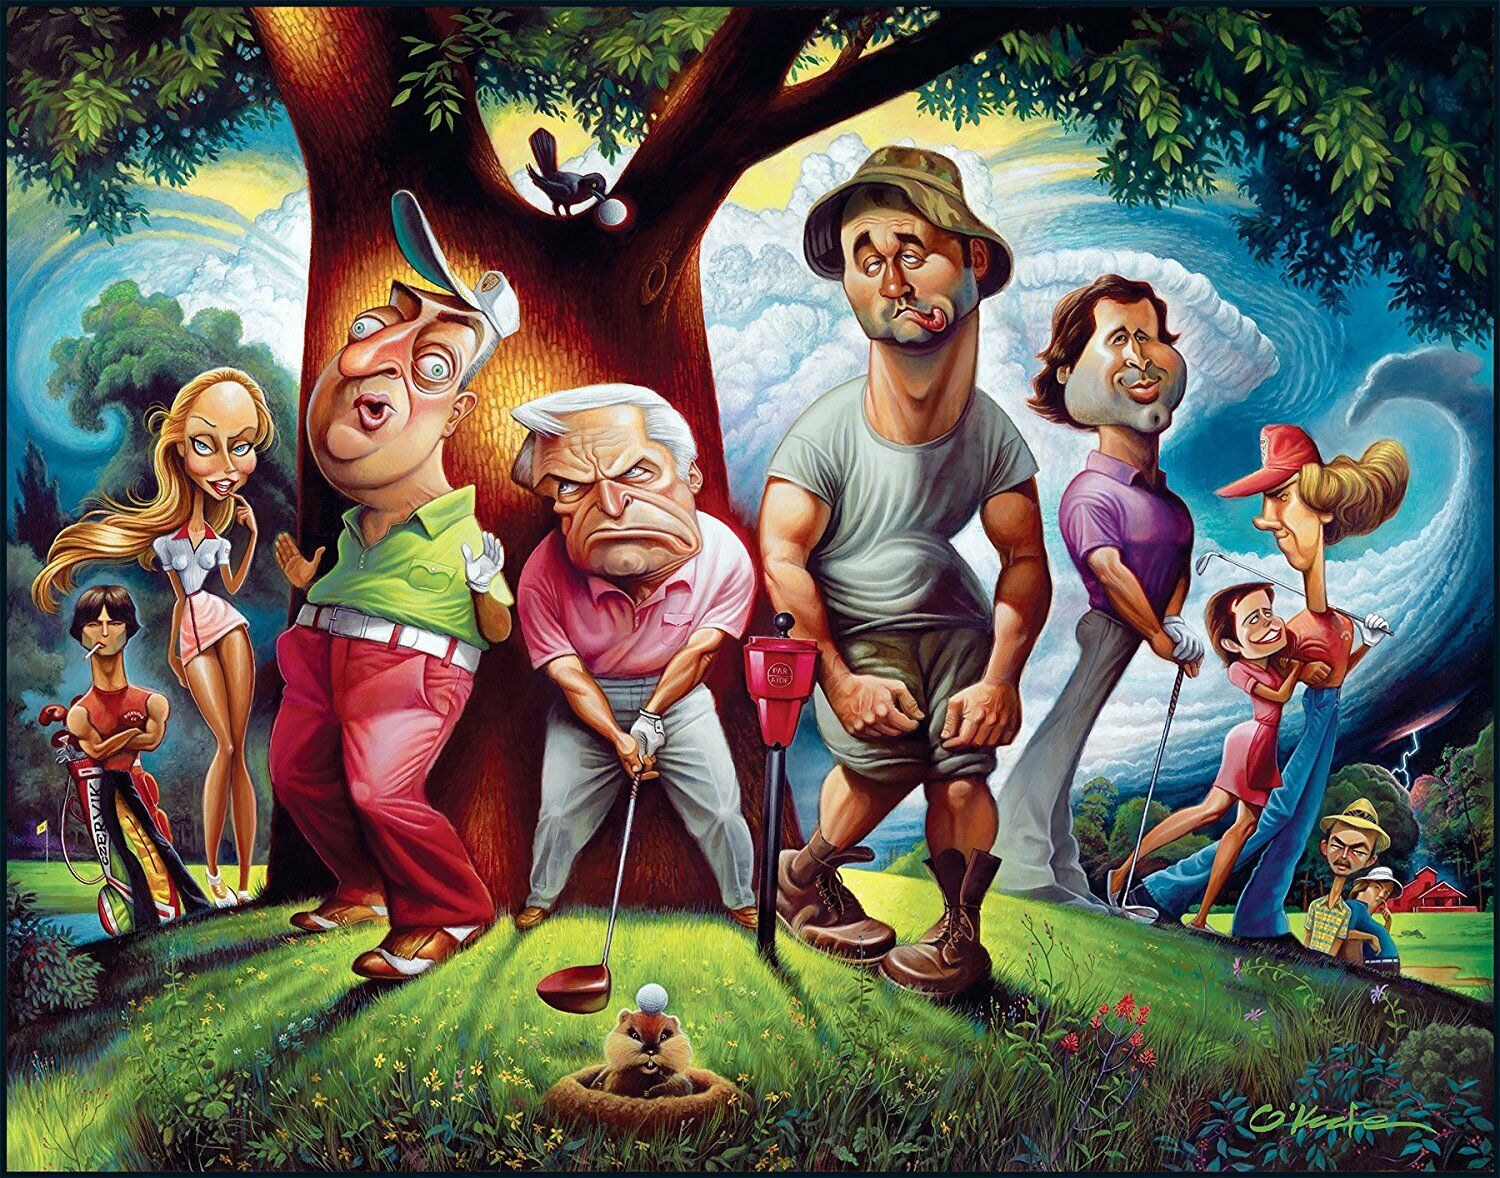 A Tribute To Caddyshack Fine Art Print 22" By 28" By Artist David O'keefe